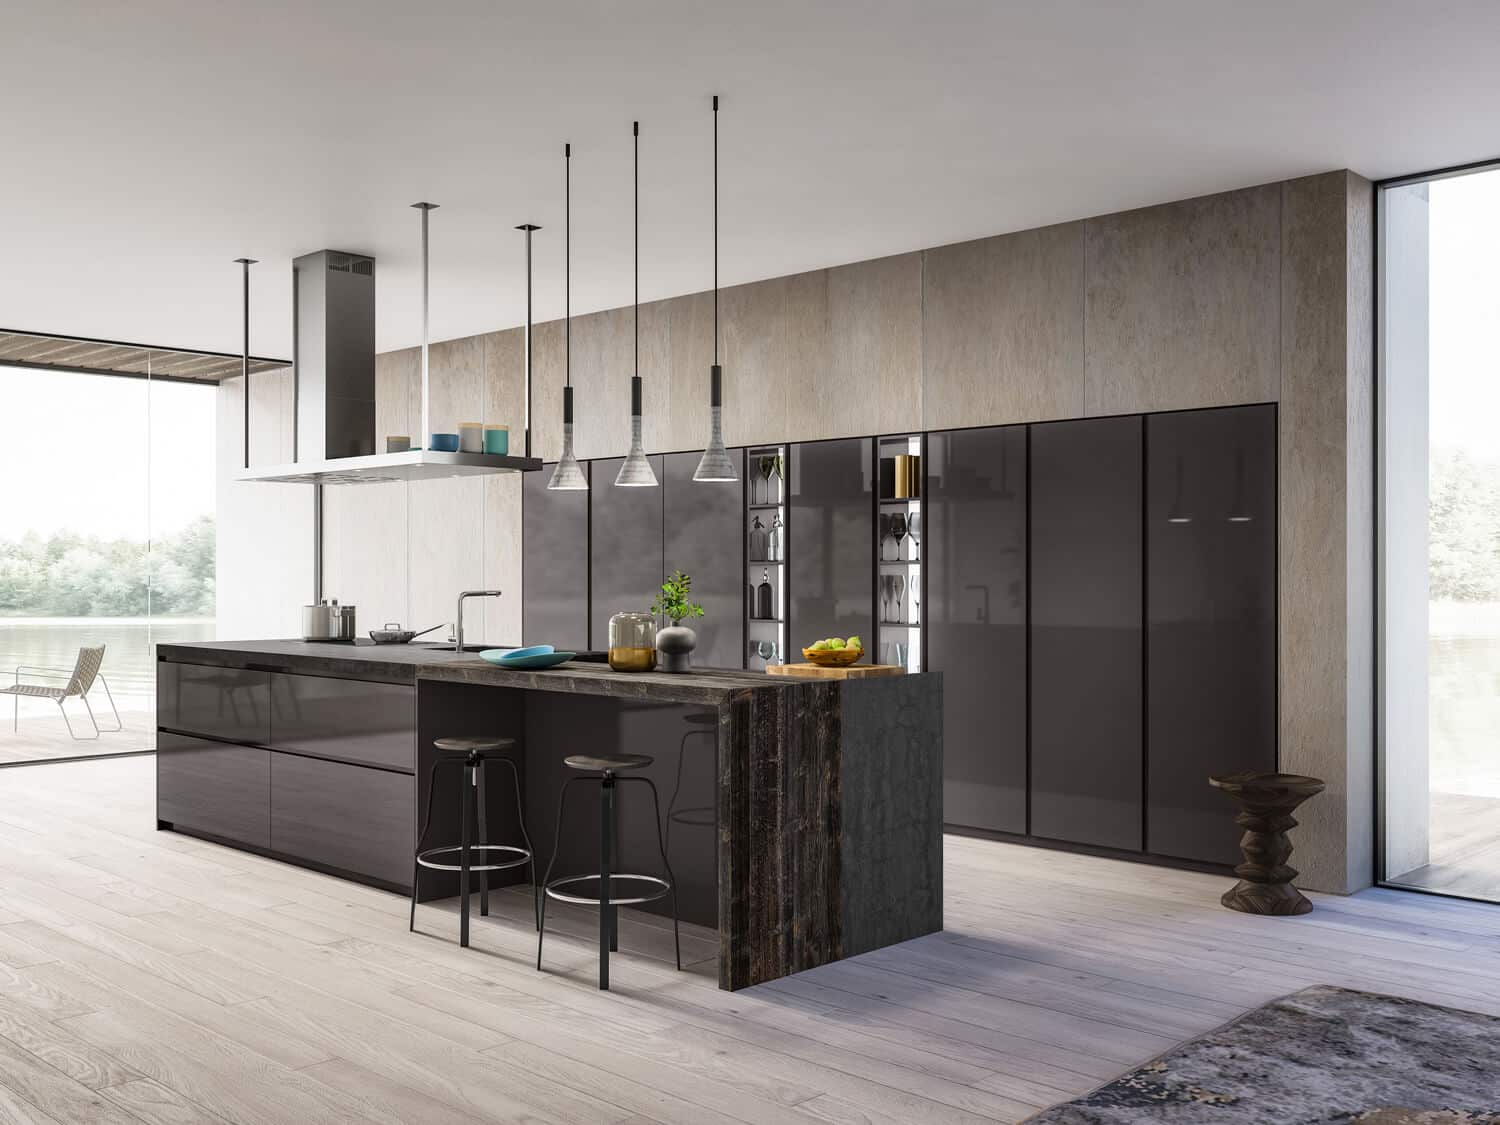 Luxury kitchen in Grigio Fumo high gloss lacquer, with integrated door channels in the same finish.